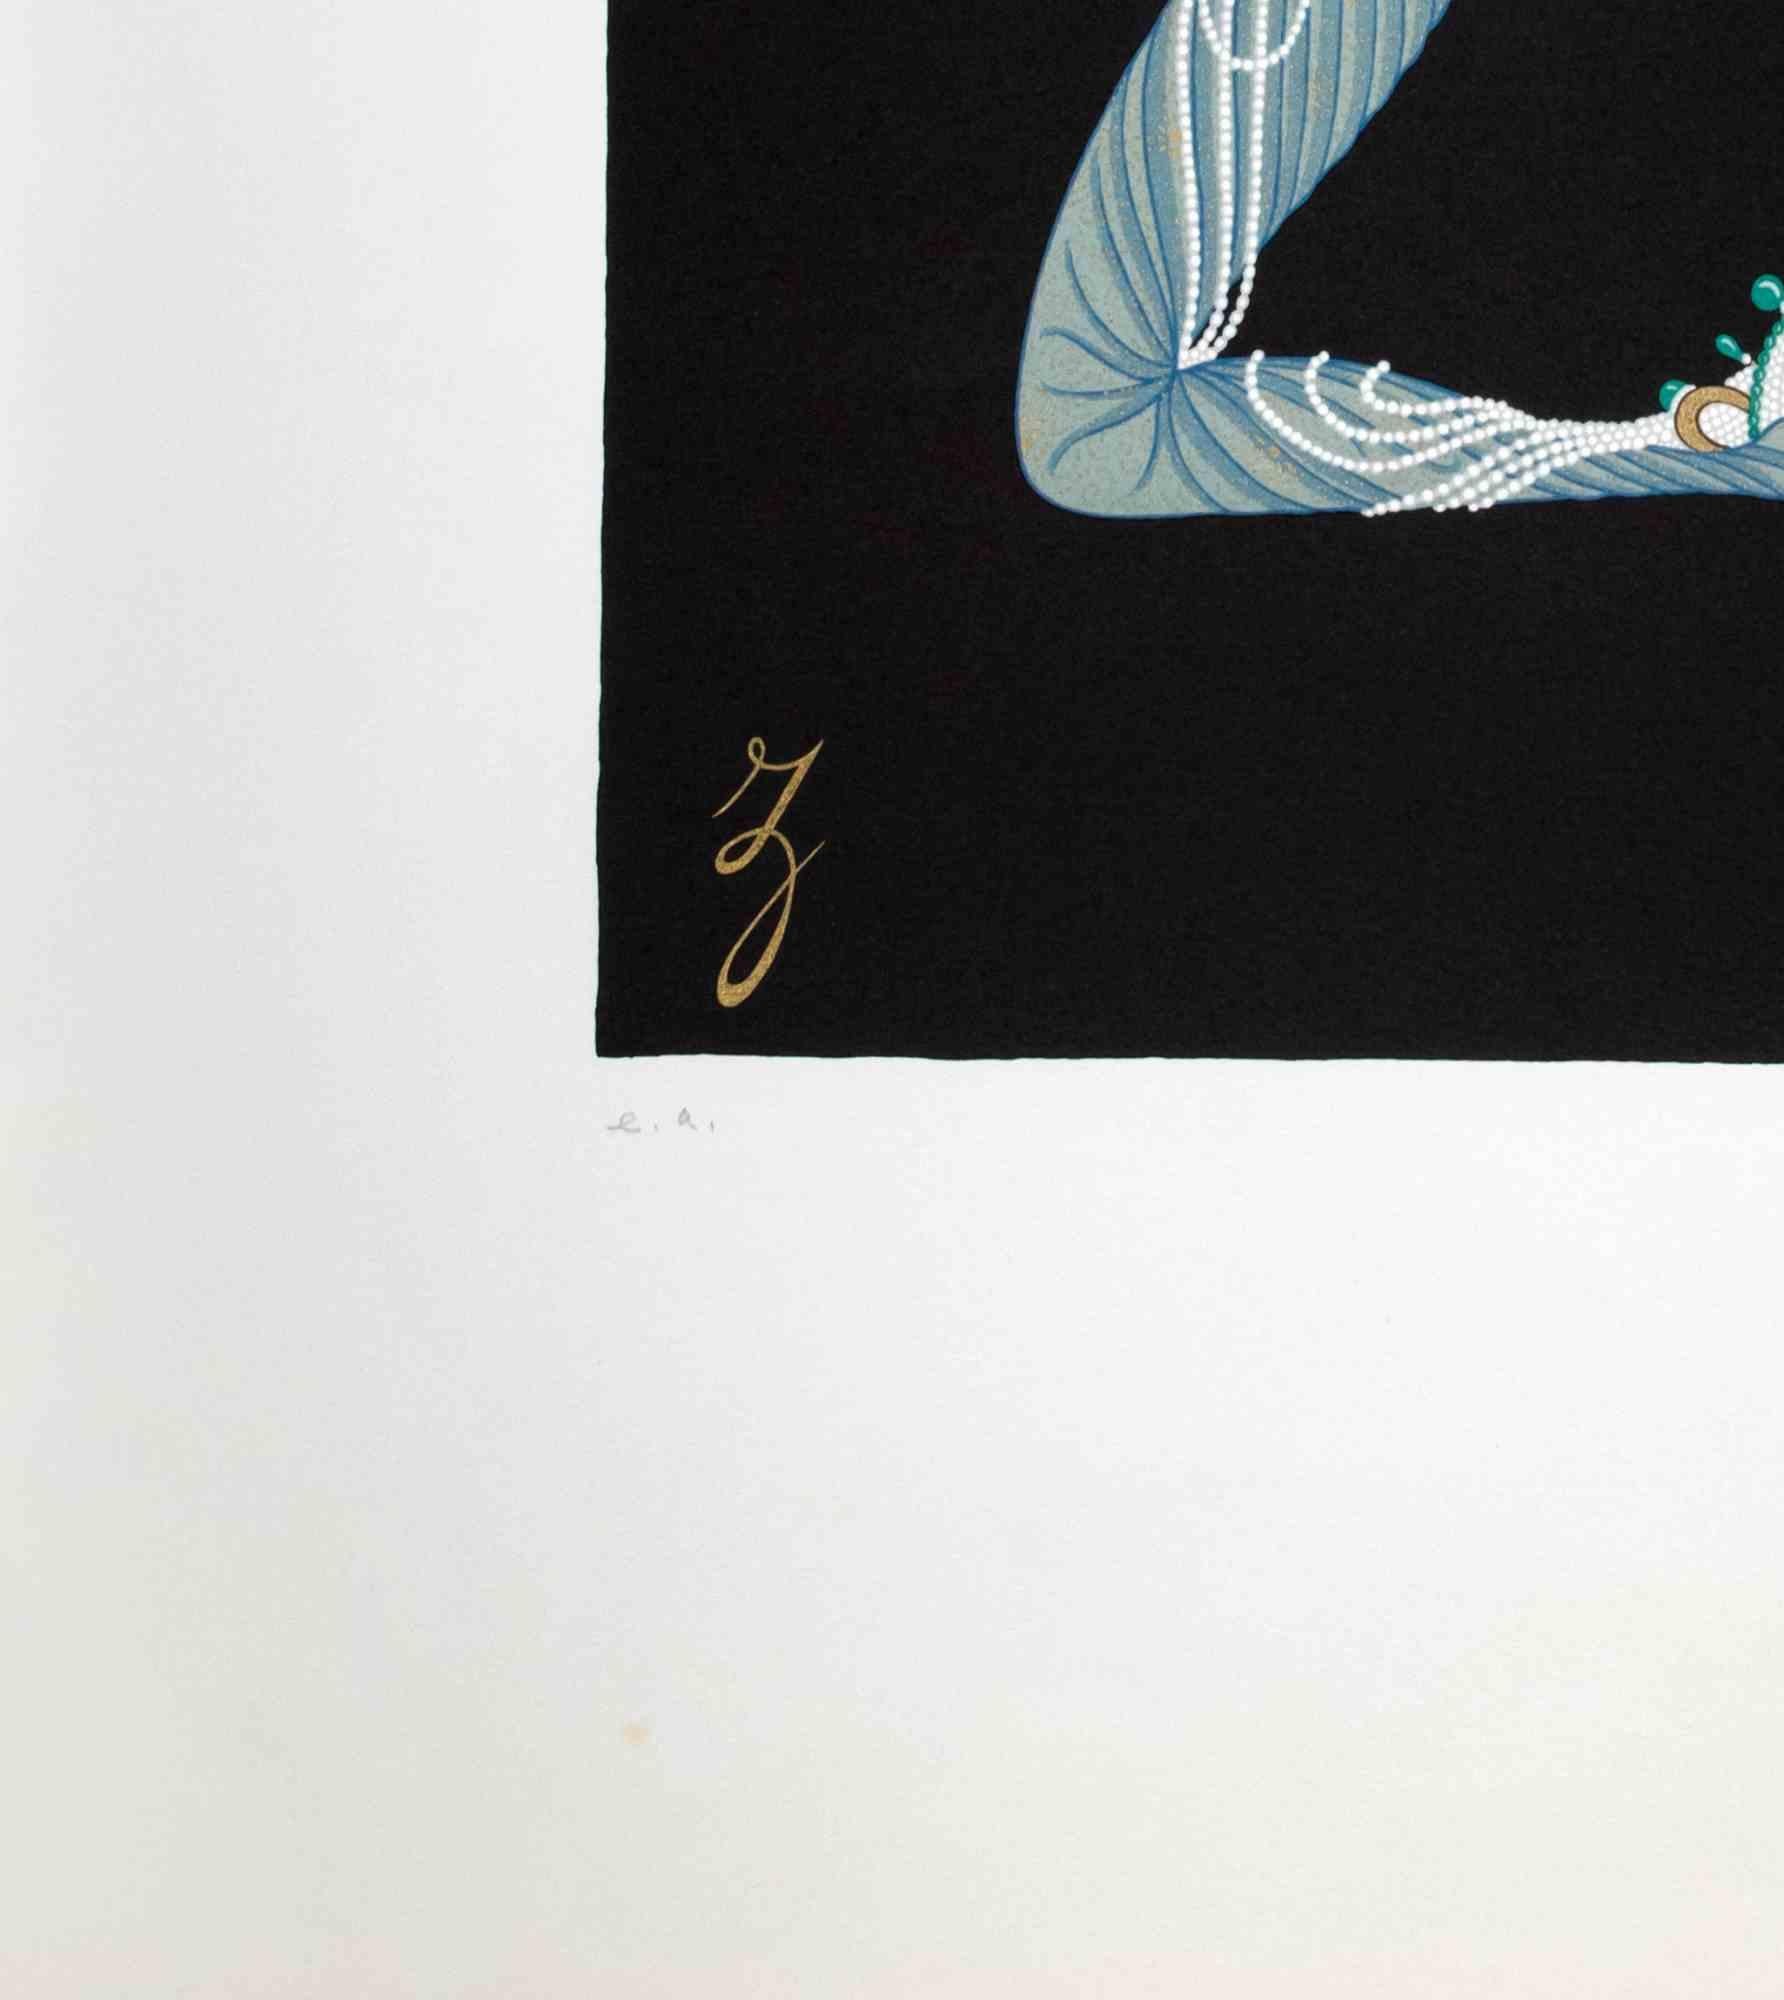 Letter Z - from the suite Letters of the Alphabet is a contemporary artwork realized by Erté (Romain de Tirtoff).

Lithograph and Screen Print.

The artwork is from the suite 